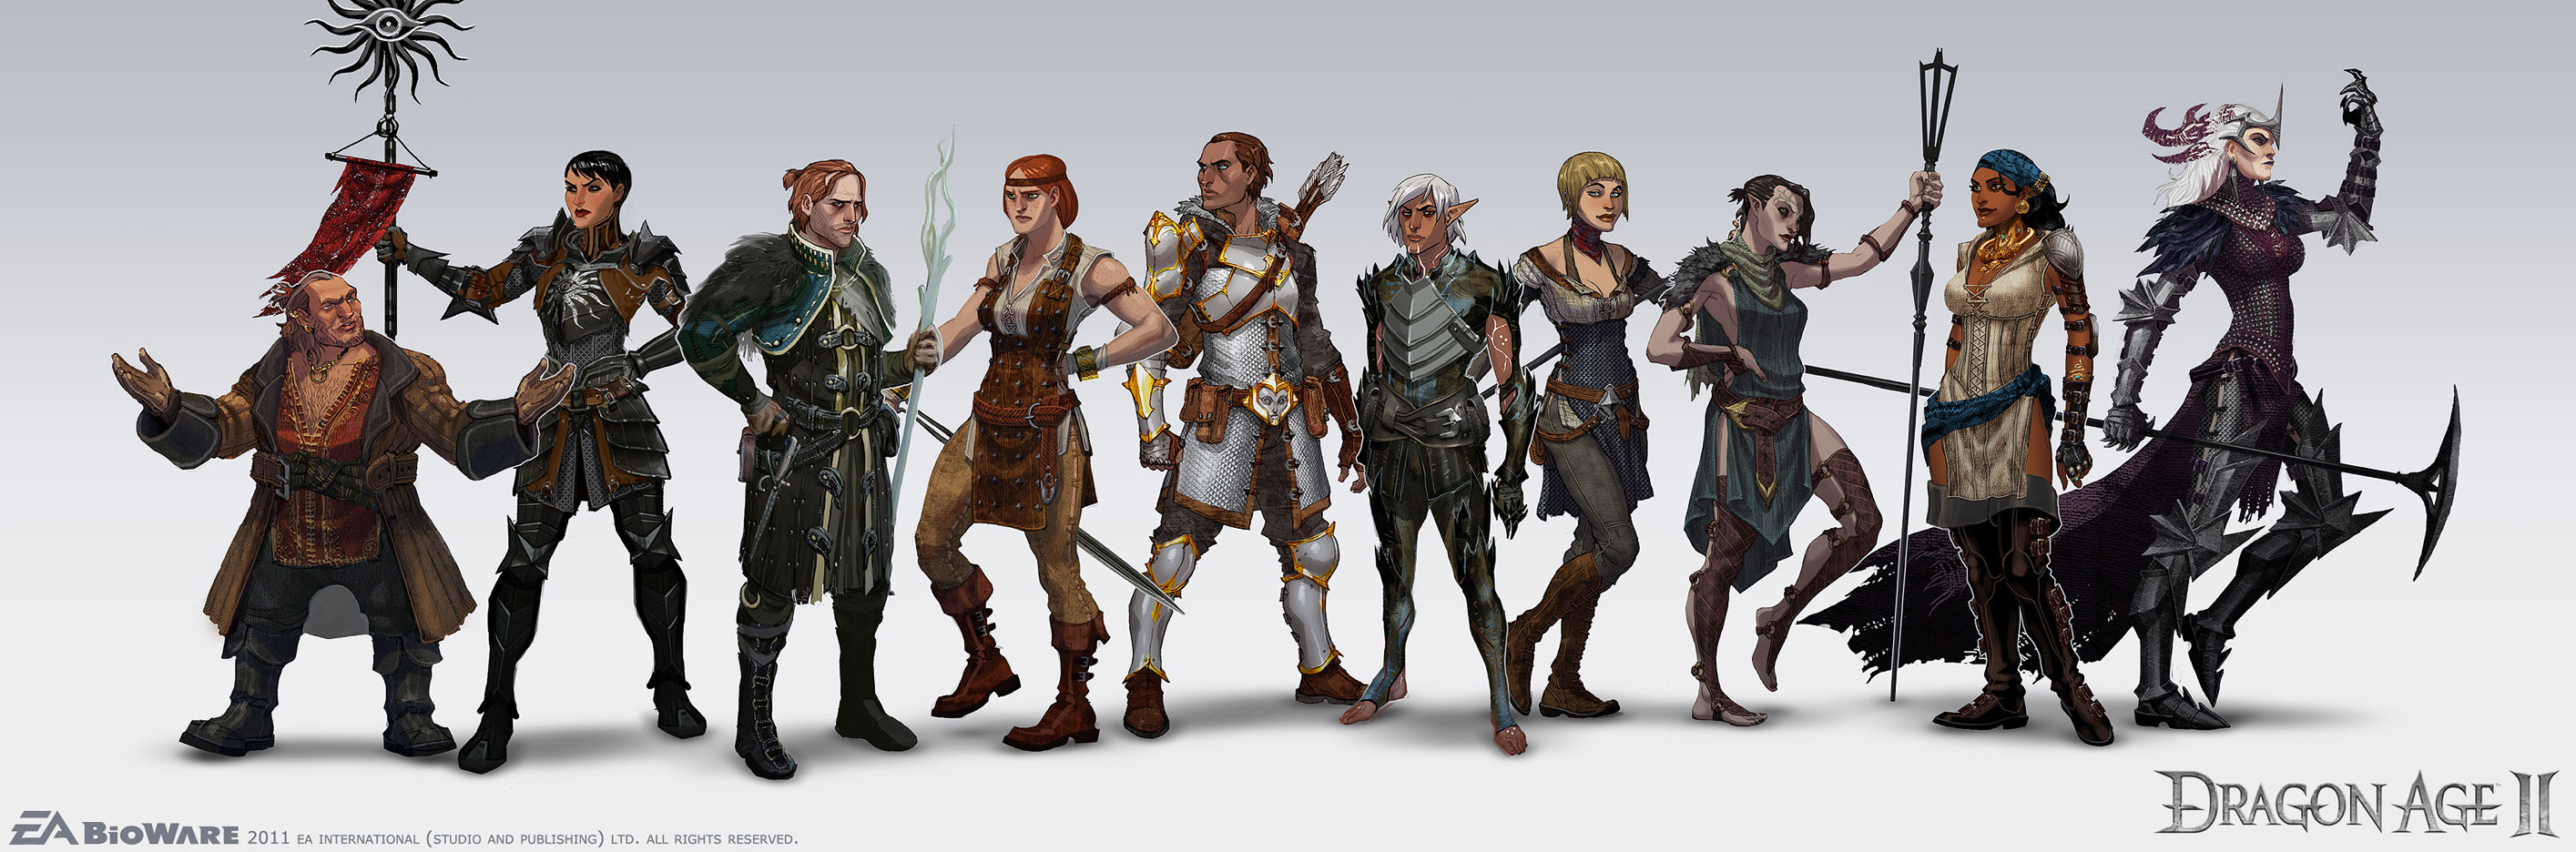 dragon_age_ii_characters_by_mattrhodes-d3a6ll9